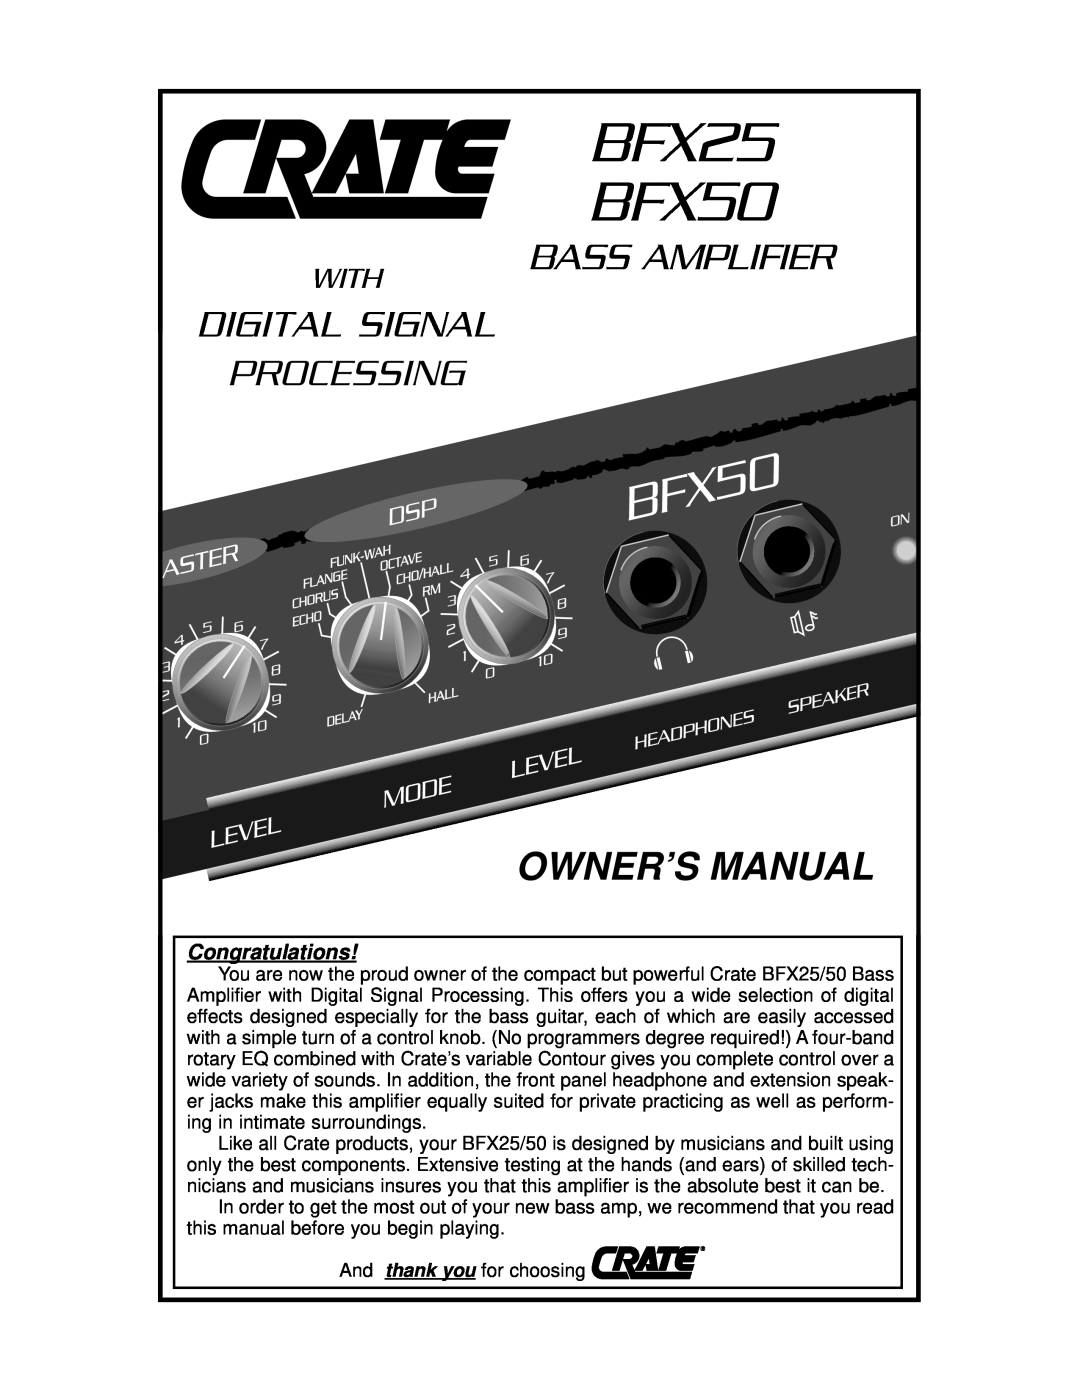 Crate Amplifiers owner manual BFX25 BFX50, Bass Amplifier, Digital Signal Processing, With, Congratulations 